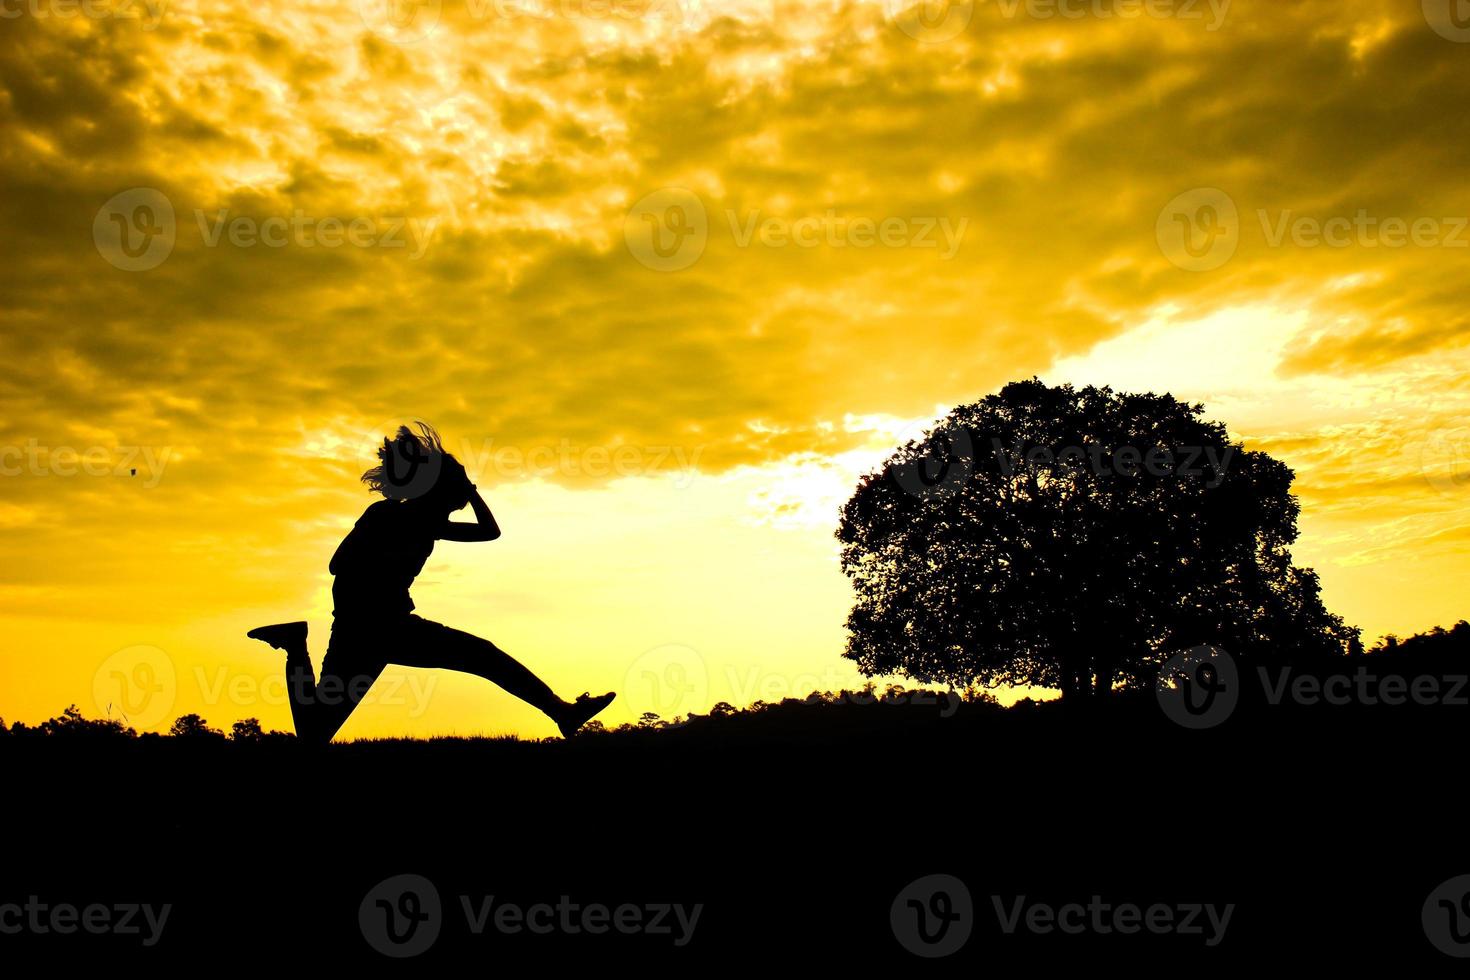 The silhouette of the woman jumping before sunrise with tree in the background photo